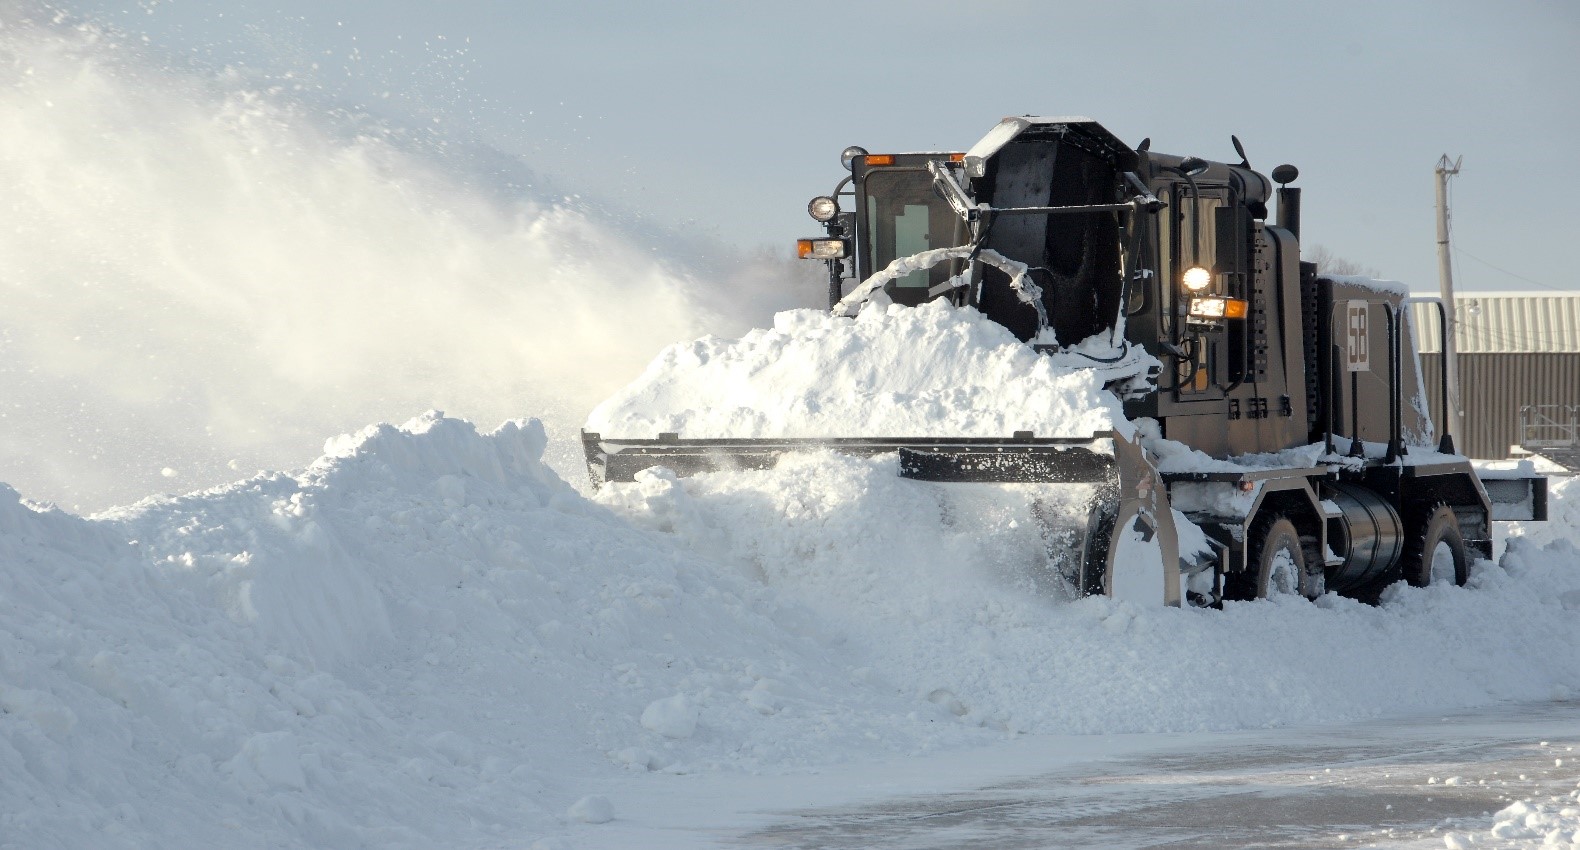 commercial snow removal services